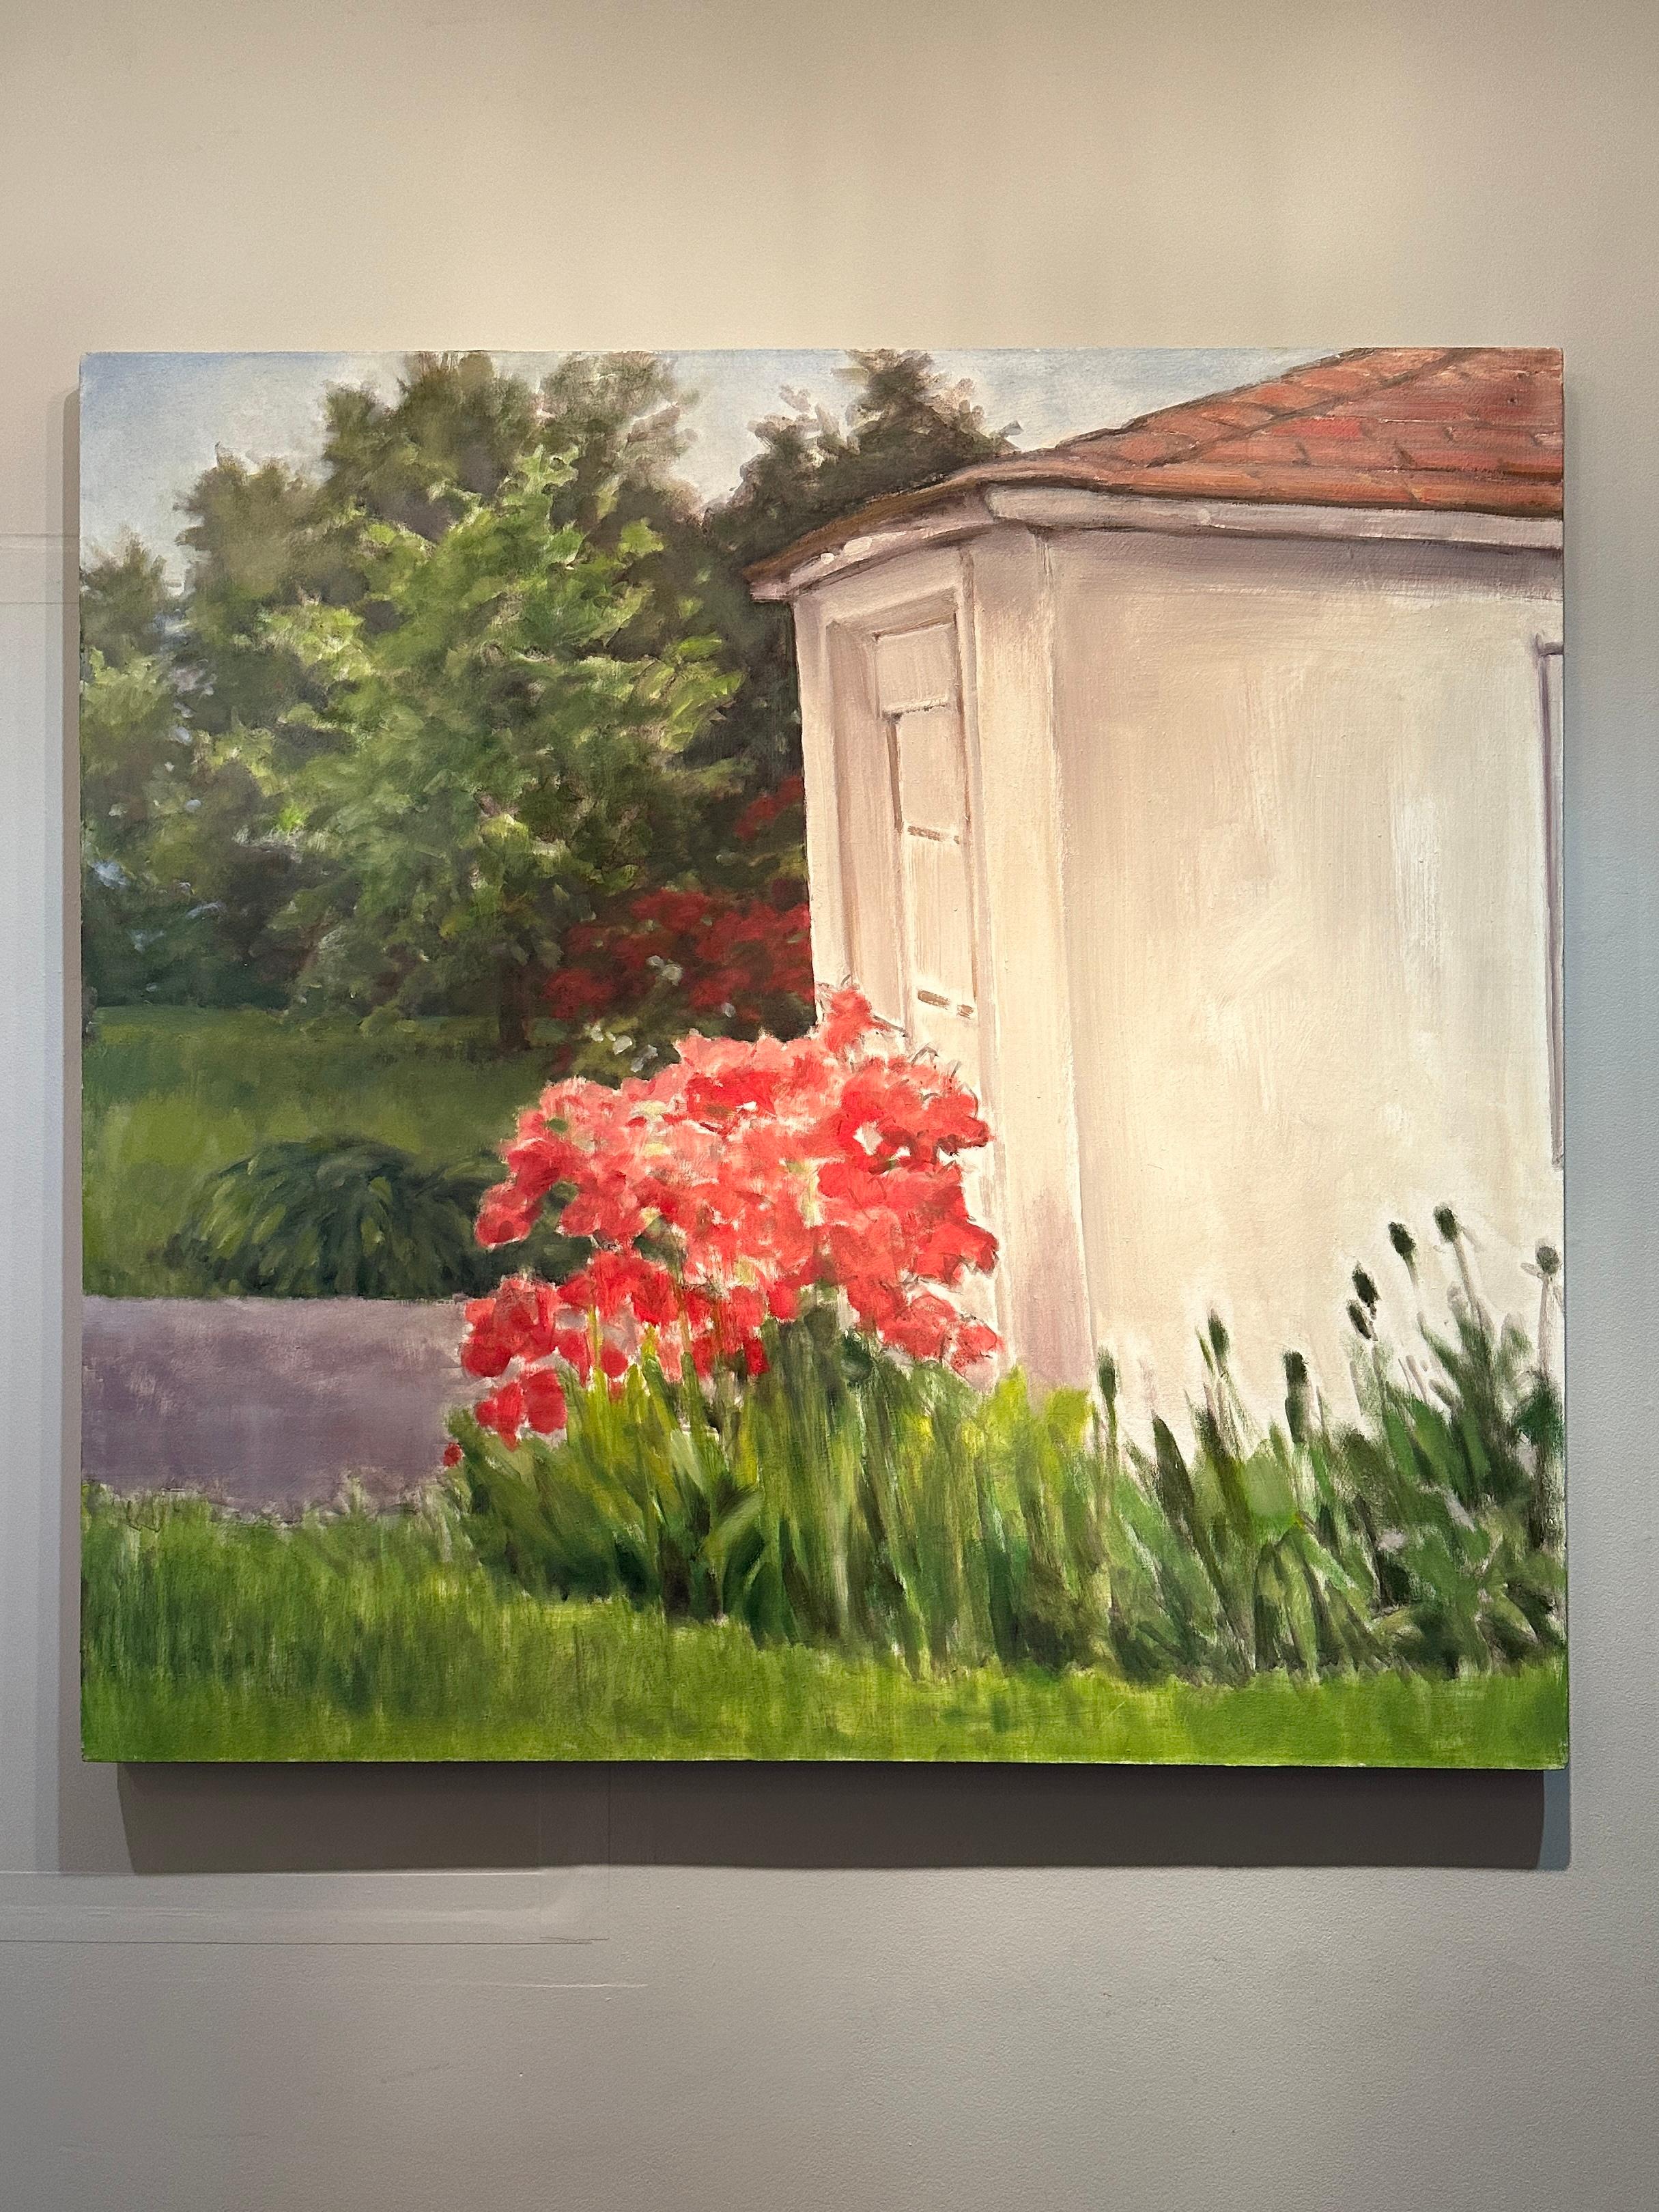 Azalea by a Garage Door, 2010, oil on canvas, floral outdoor painting For Sale 1